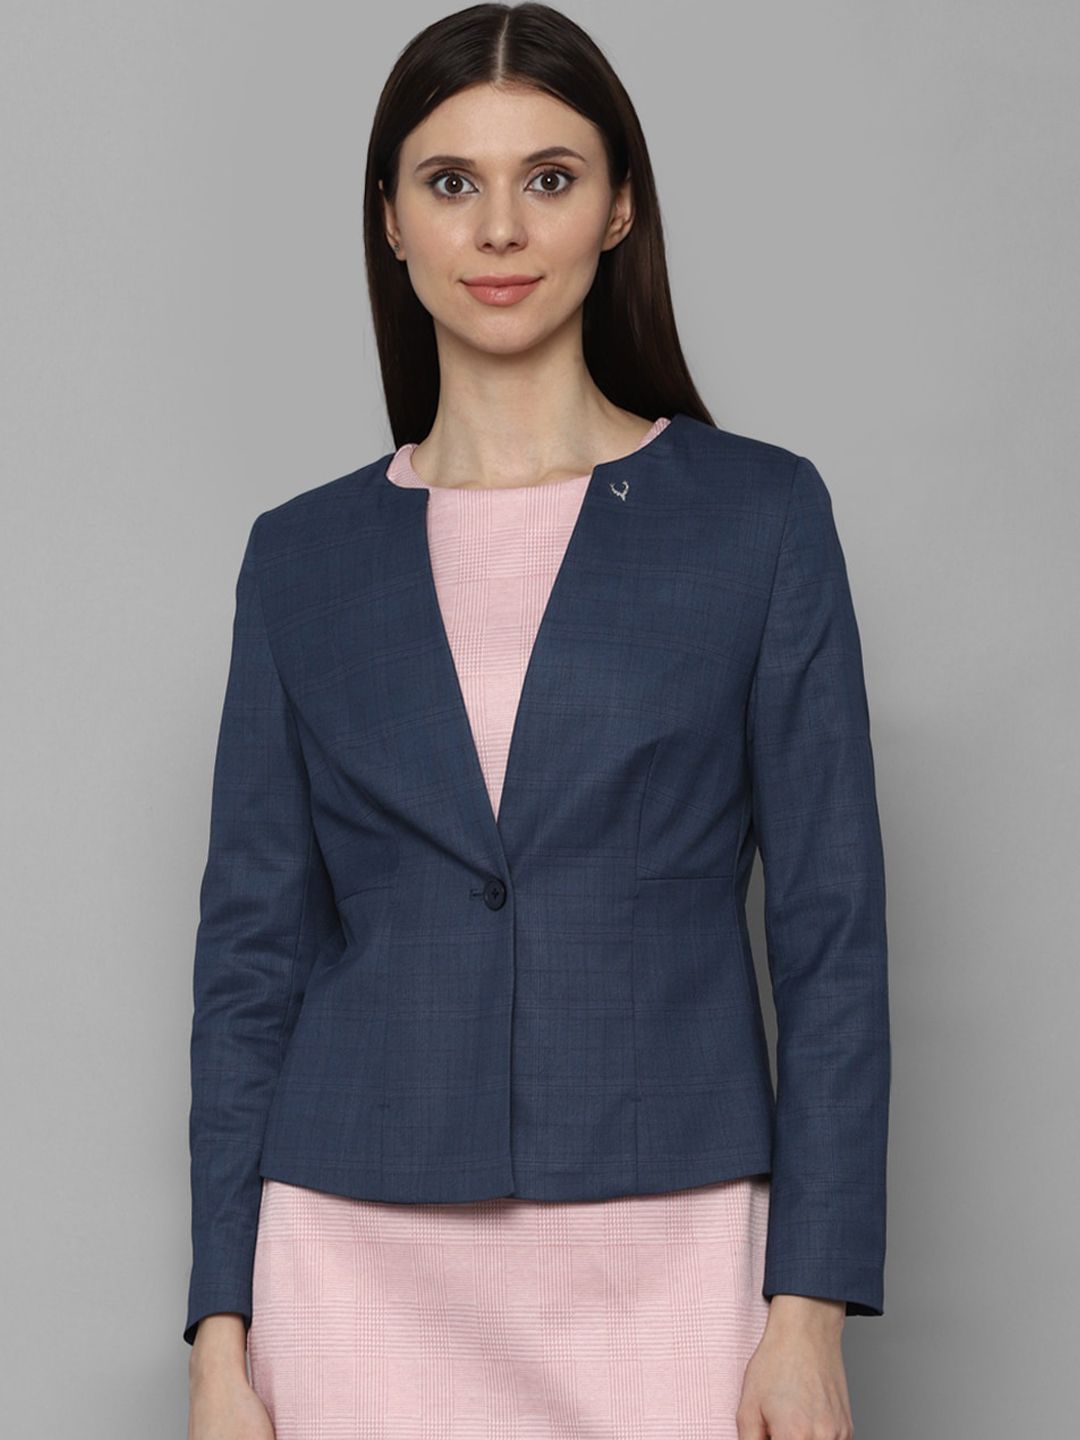 Allen Solly Woman Navy Blue Solid Single-Breasted Blazers Price in India